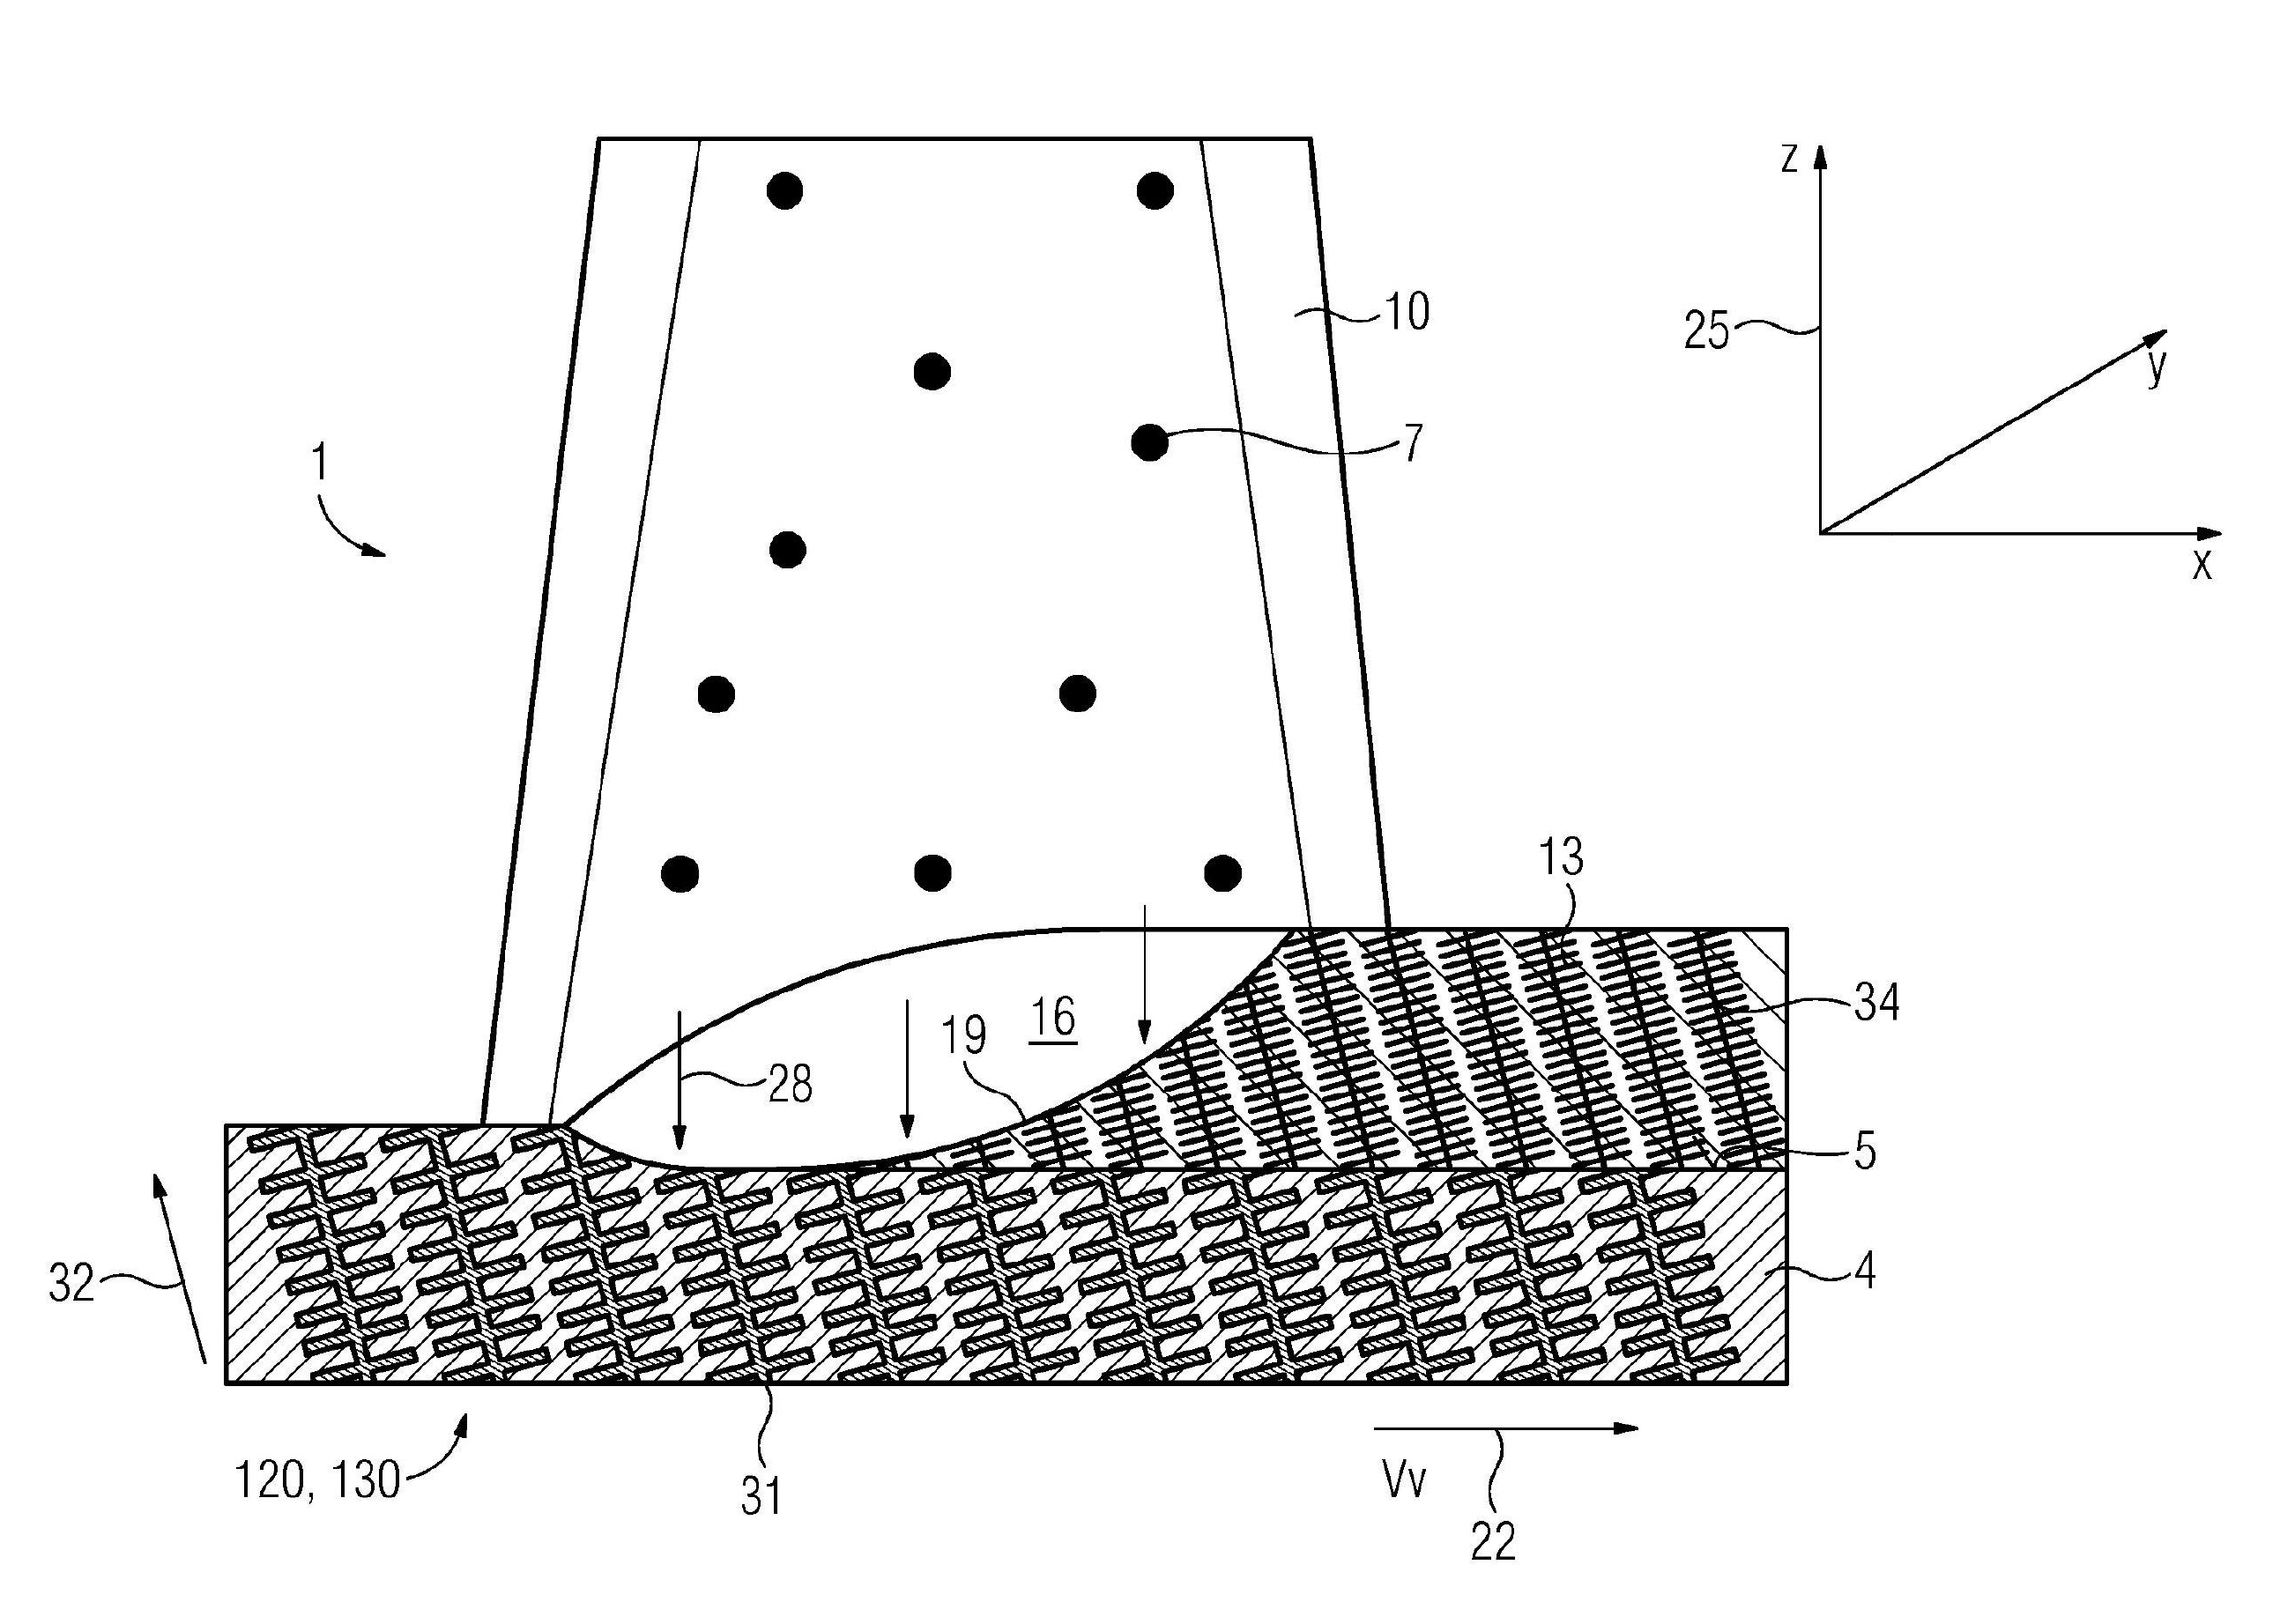 Single crystal welding of directionally solidified materials